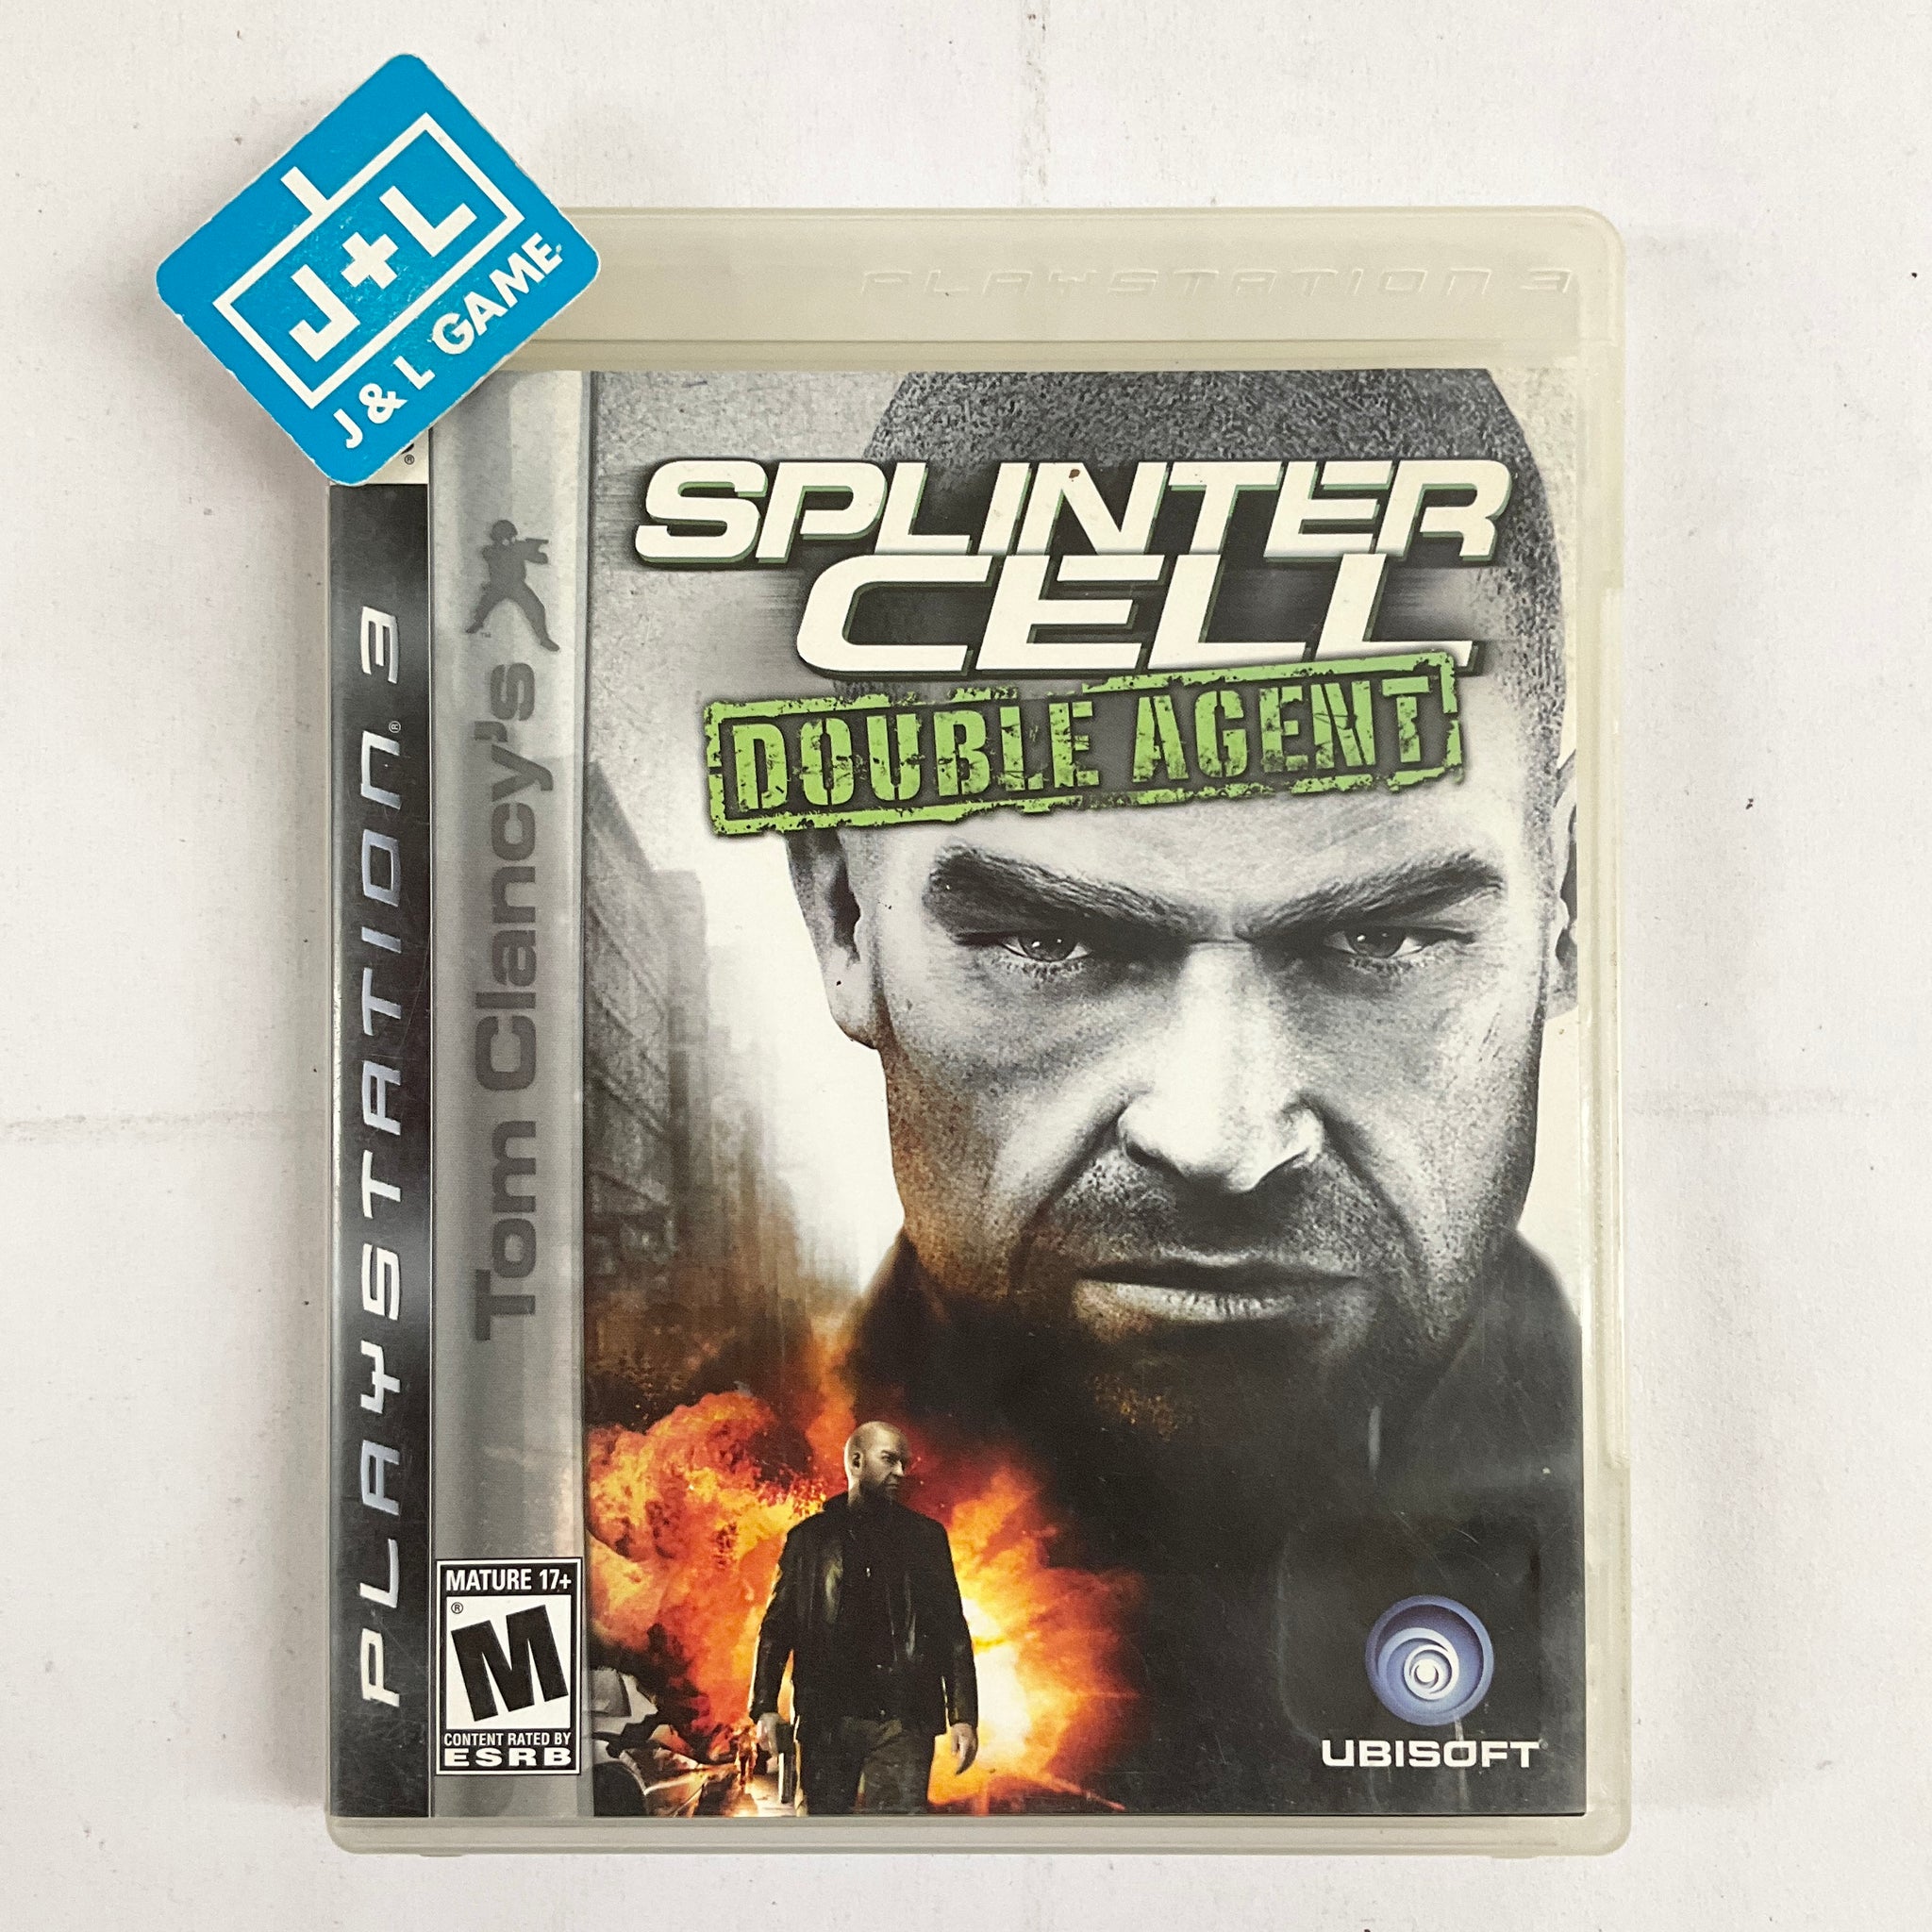 Tom Clancy's Splinter Cell Double Agent Ps2 PlayStation 2 for sale online